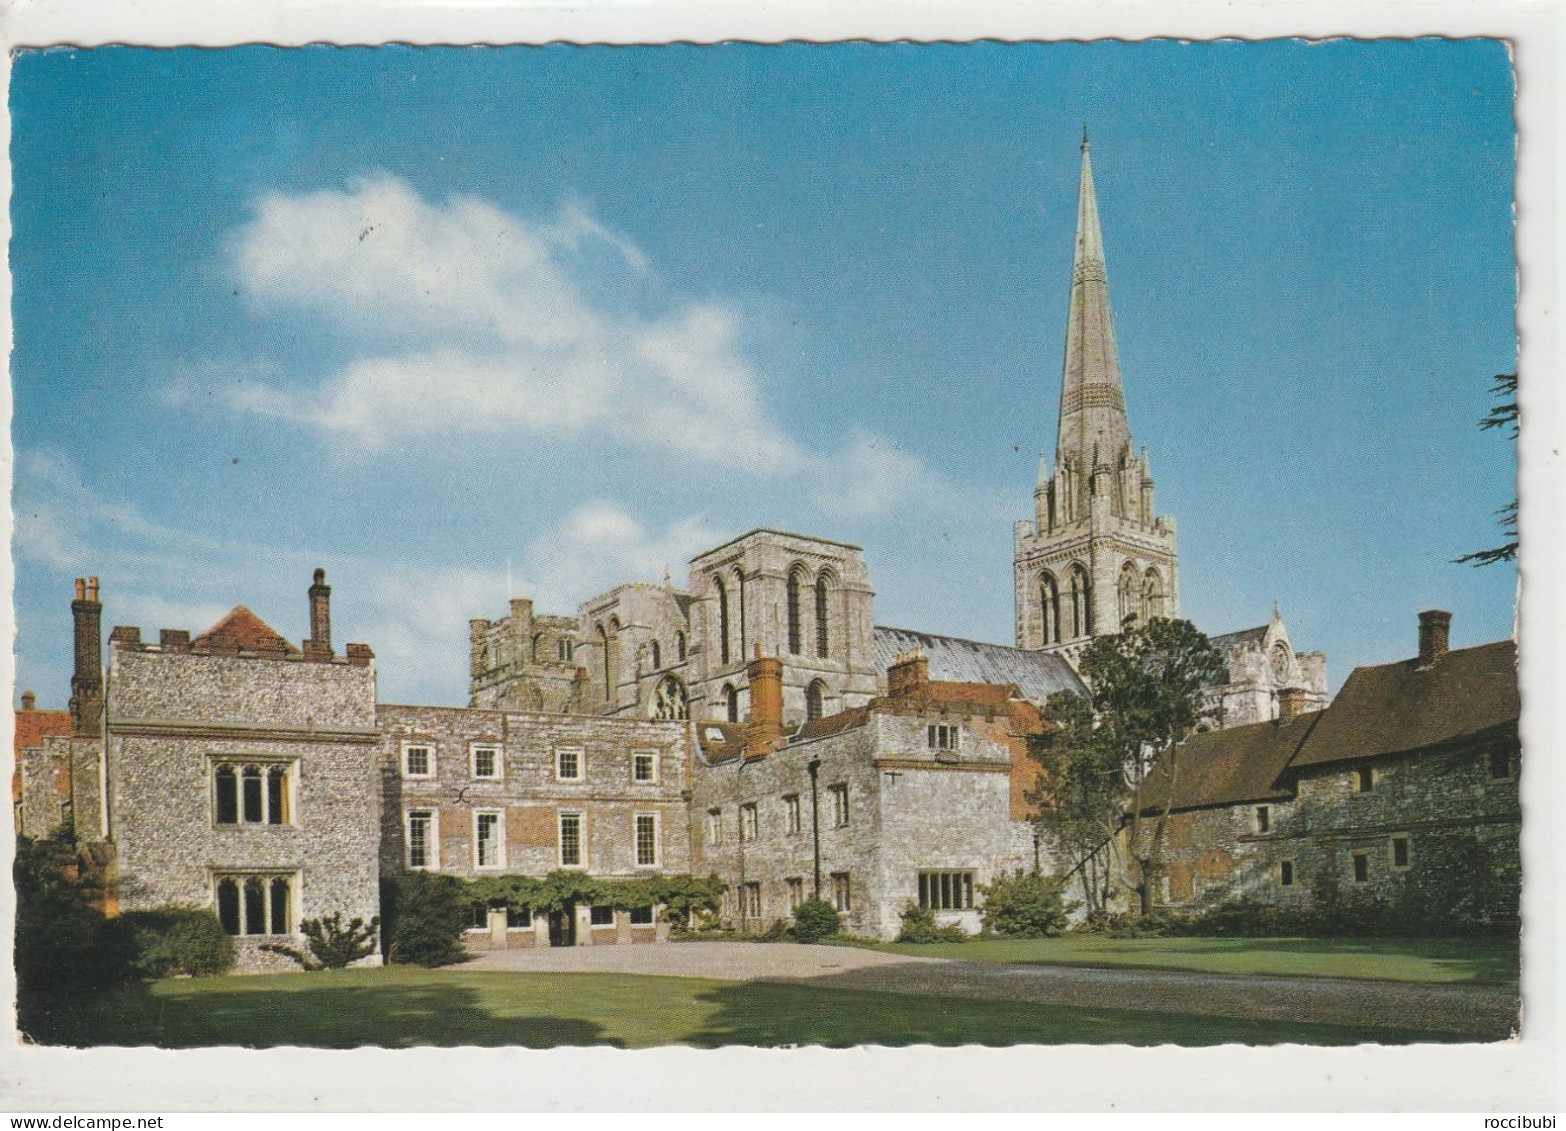 Chichester, The Palace And Cathedral, Sussex, England - Chichester